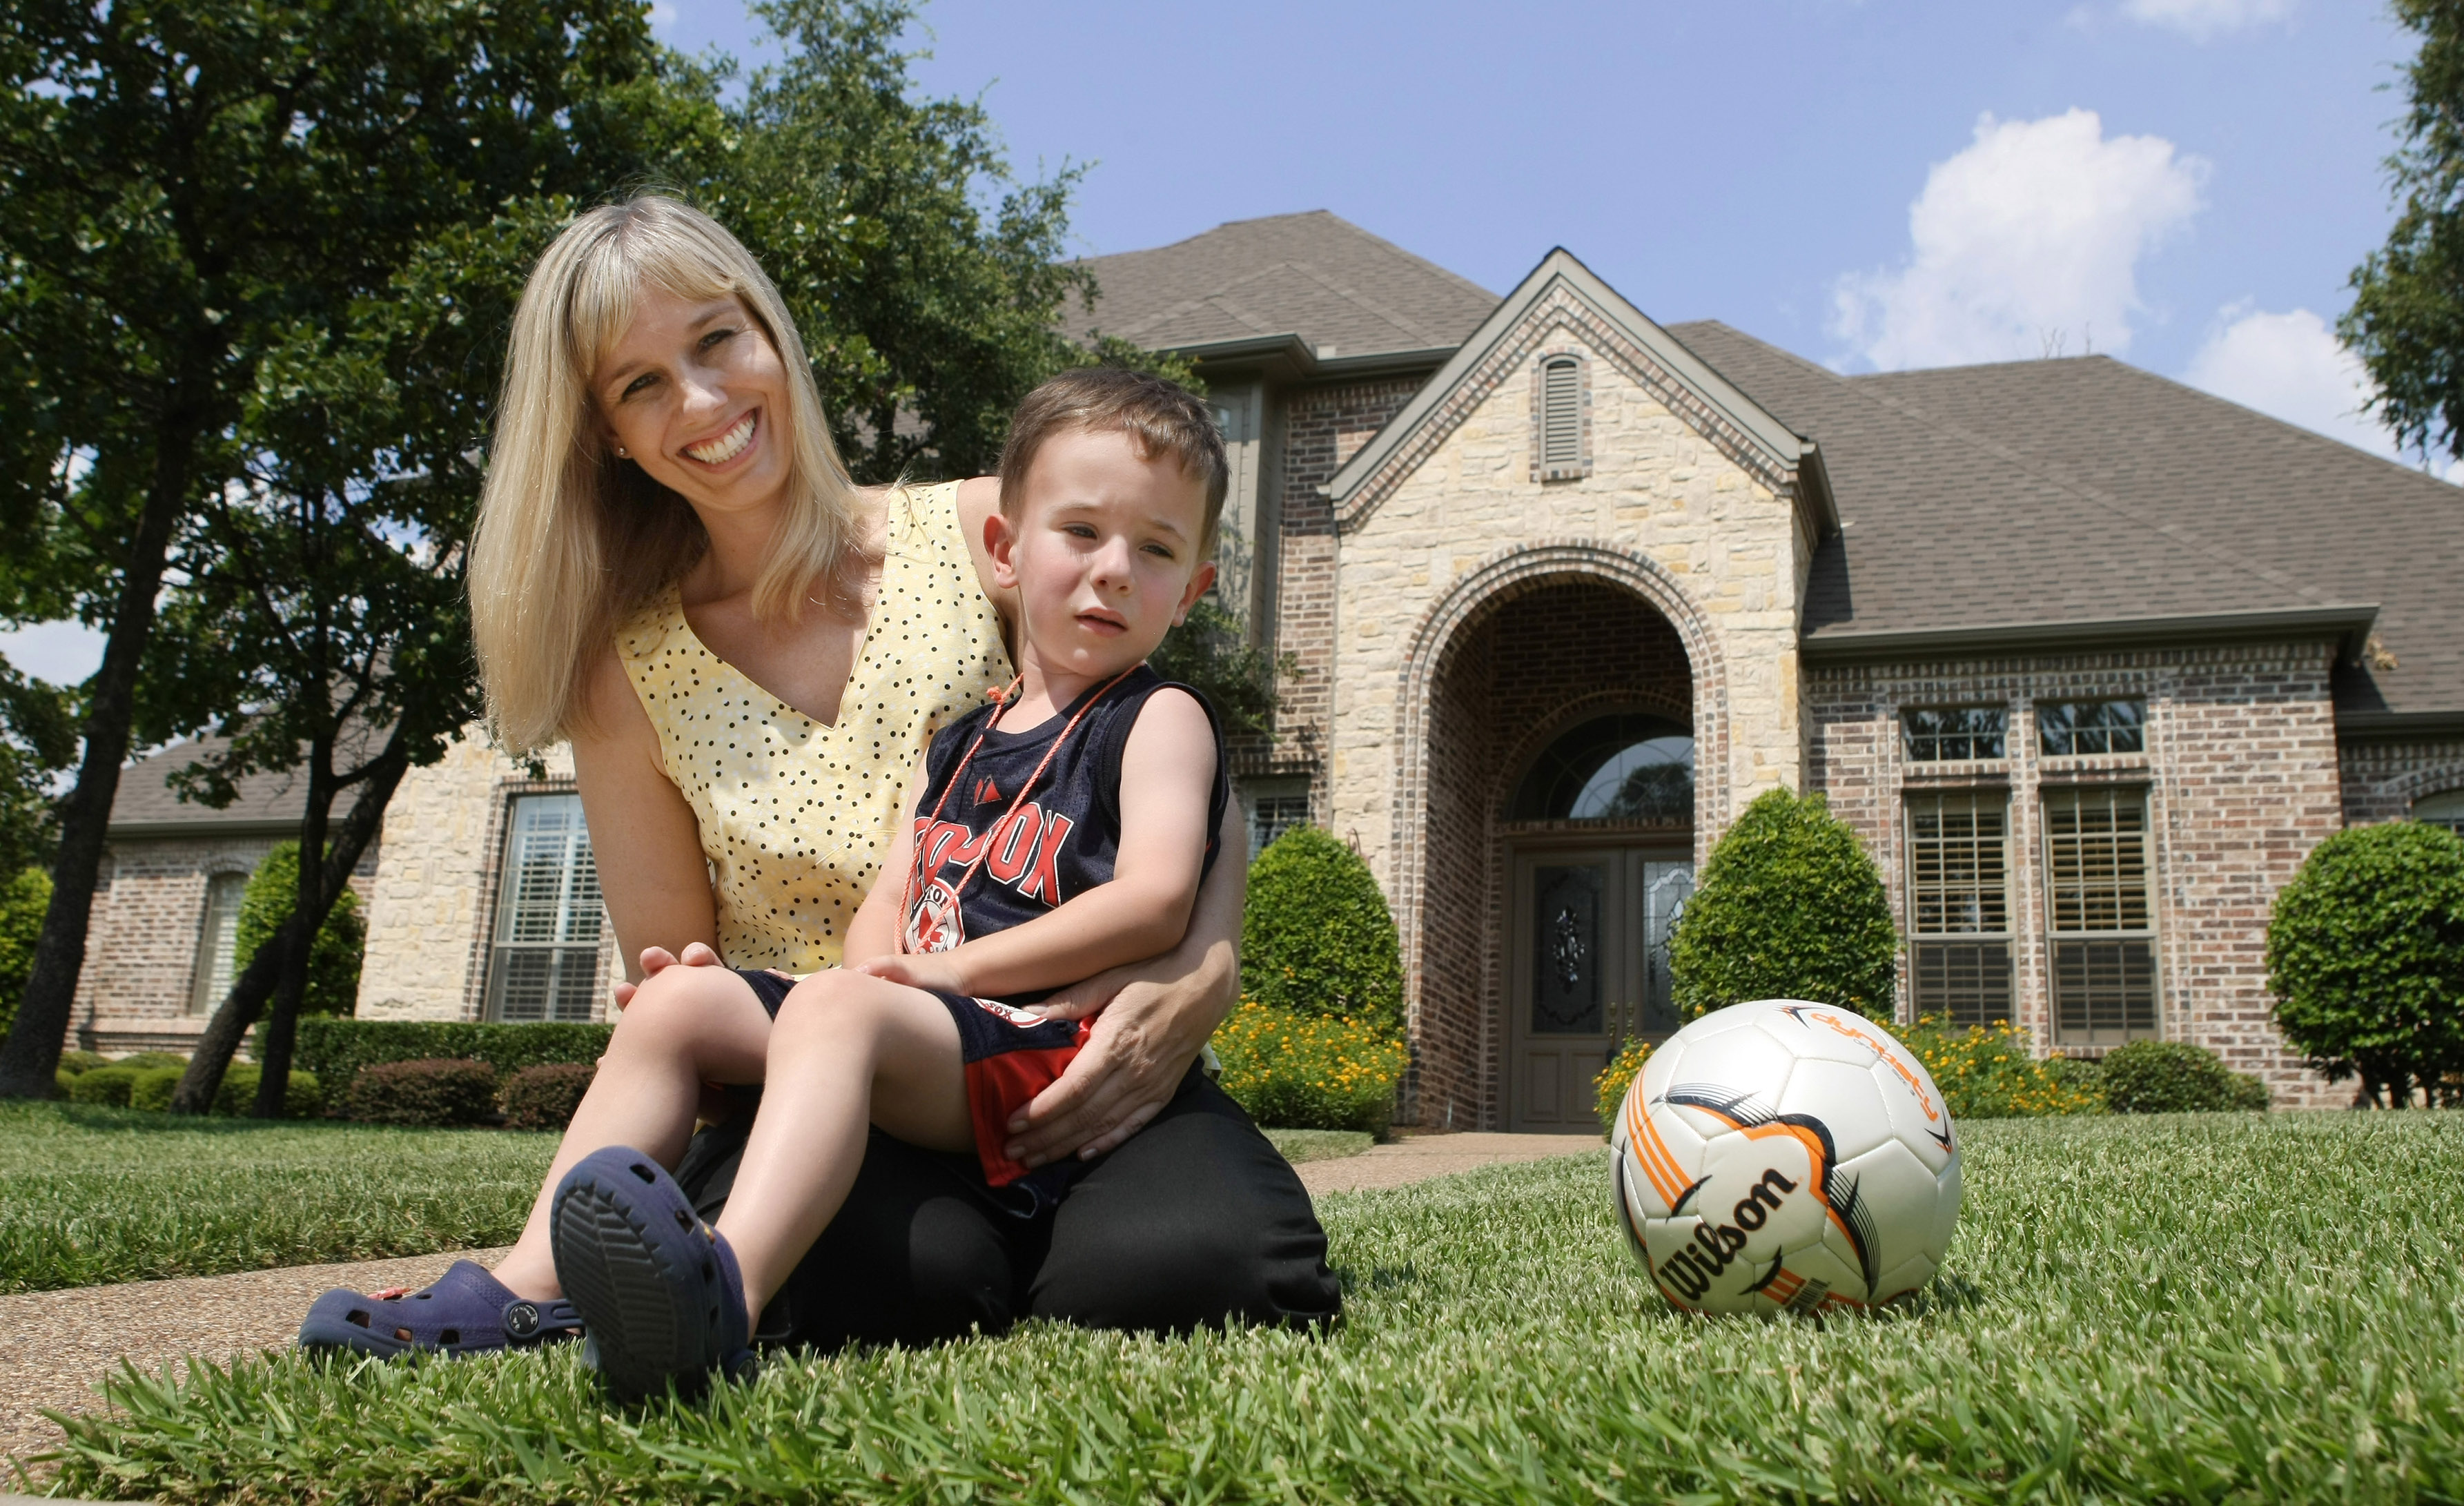 Kelly McGuire Lynch poses at her soon-to-be ex-home in Southlake, Texas, with her son Patrick, June 24, 2009. (MCT—Getty Images)